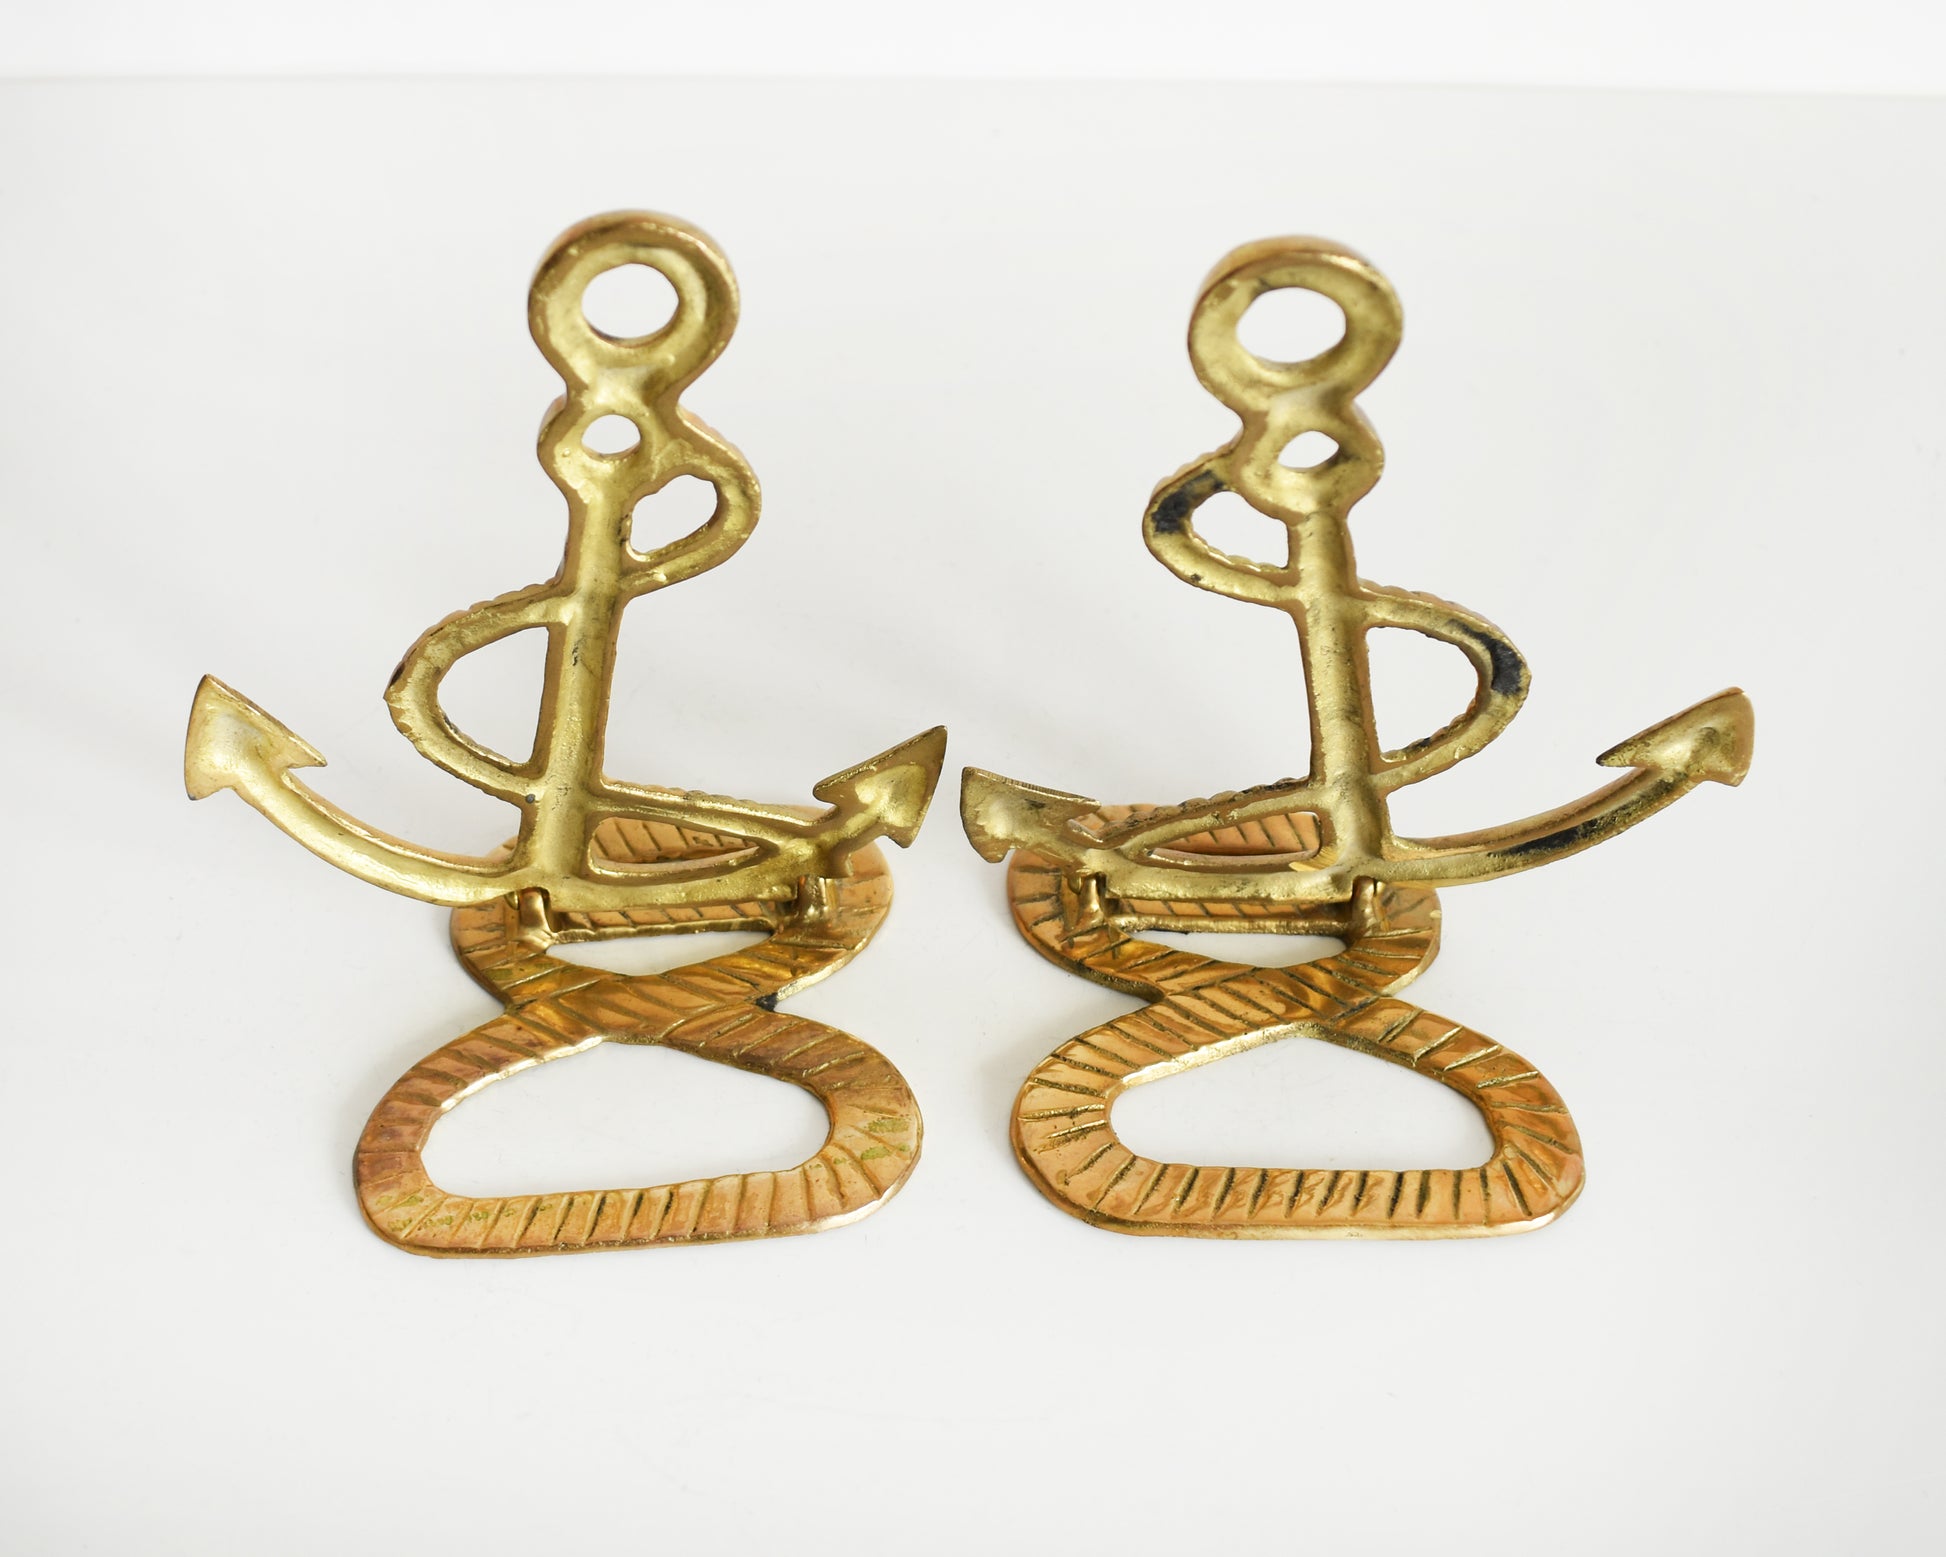 Back view of two vintage brass anchor and rope bookends.